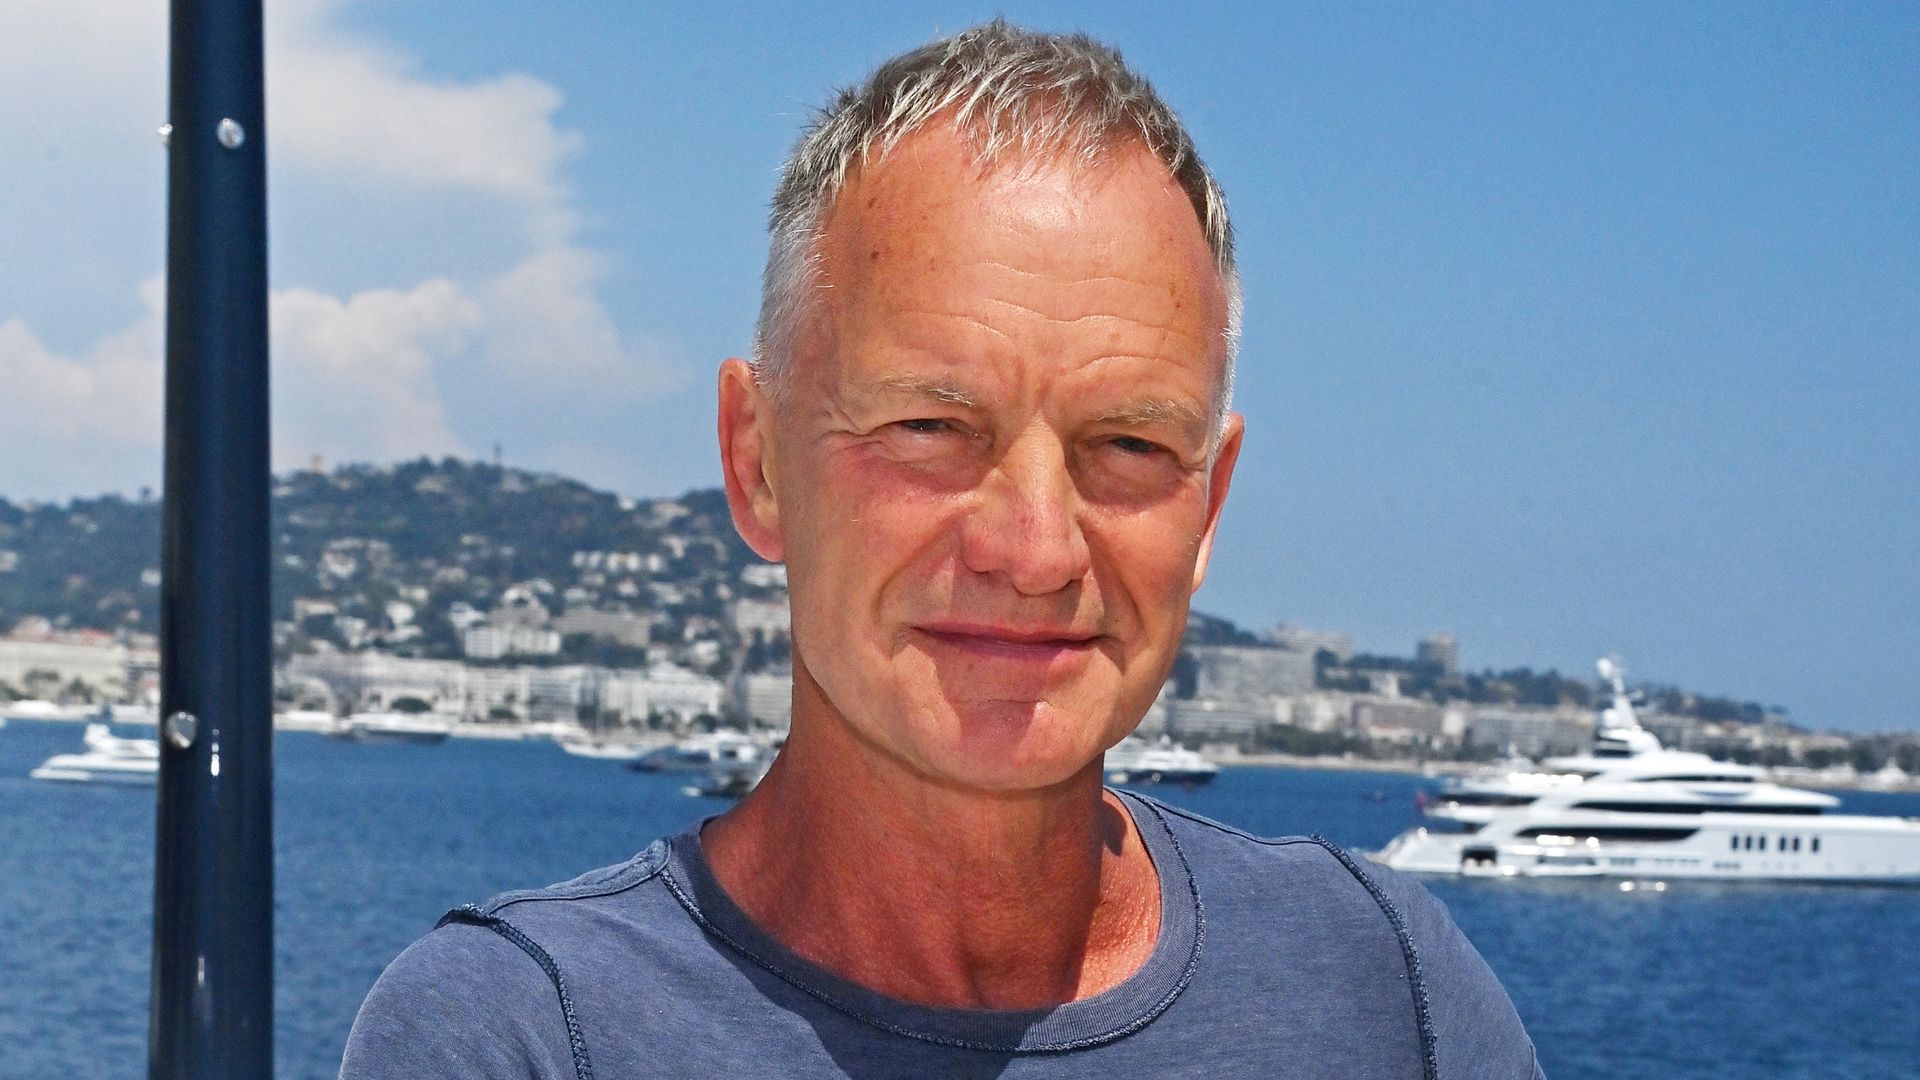 Sting attends a party during the 76th Cannes Film Festival 